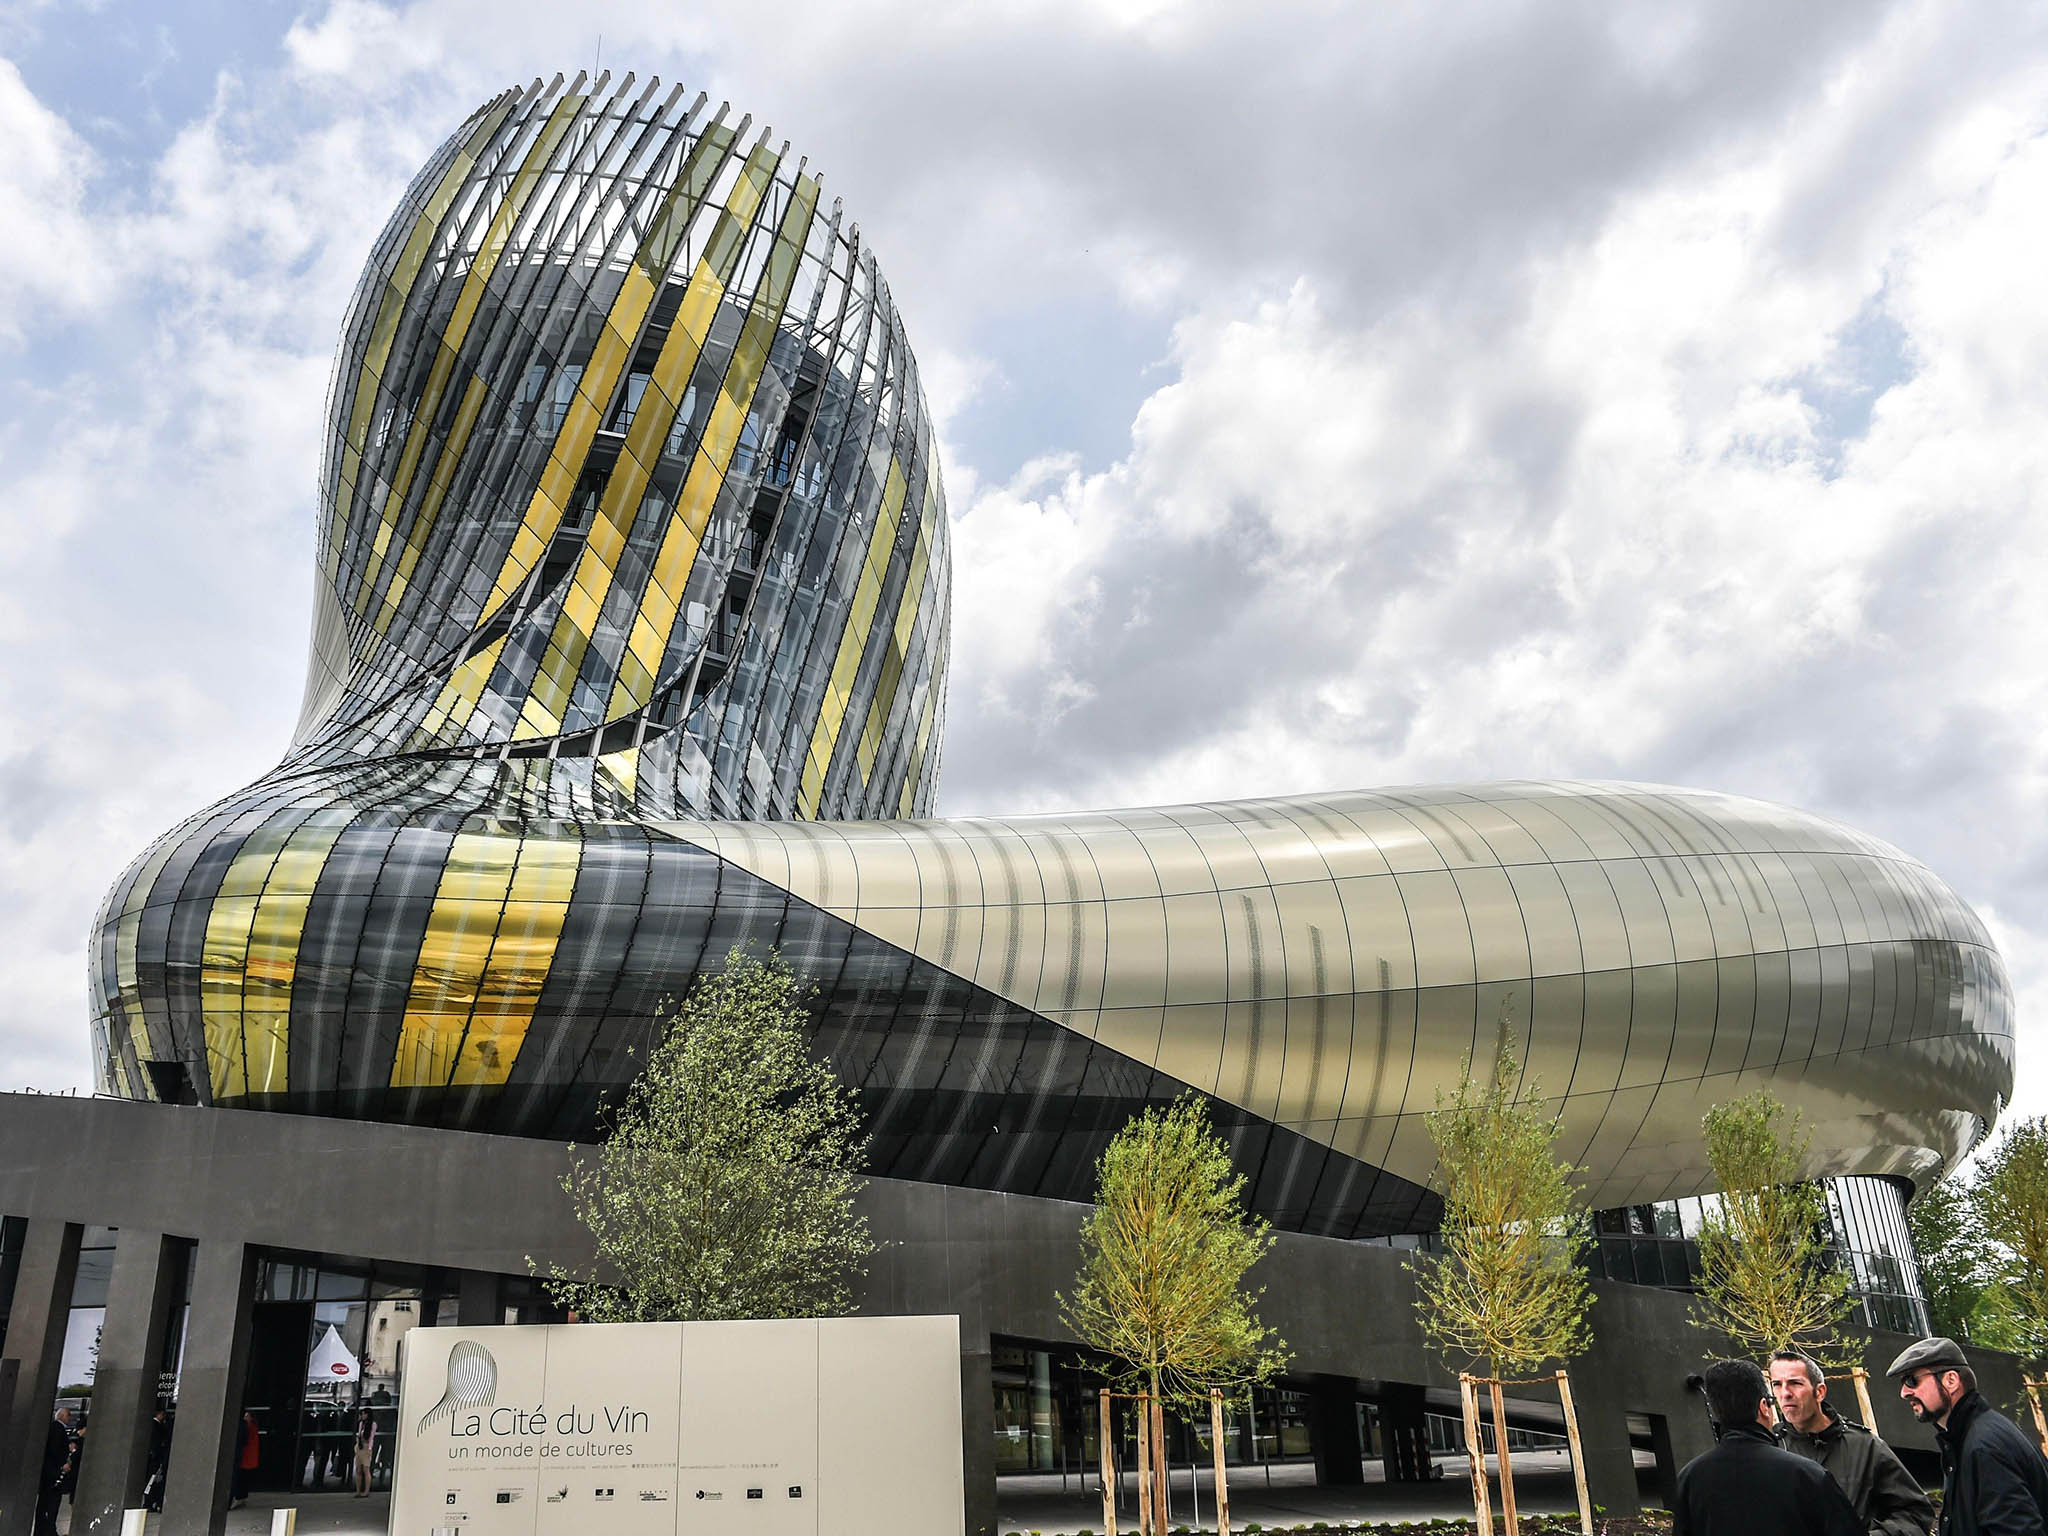 The Cite du Vin museum opened 31 May